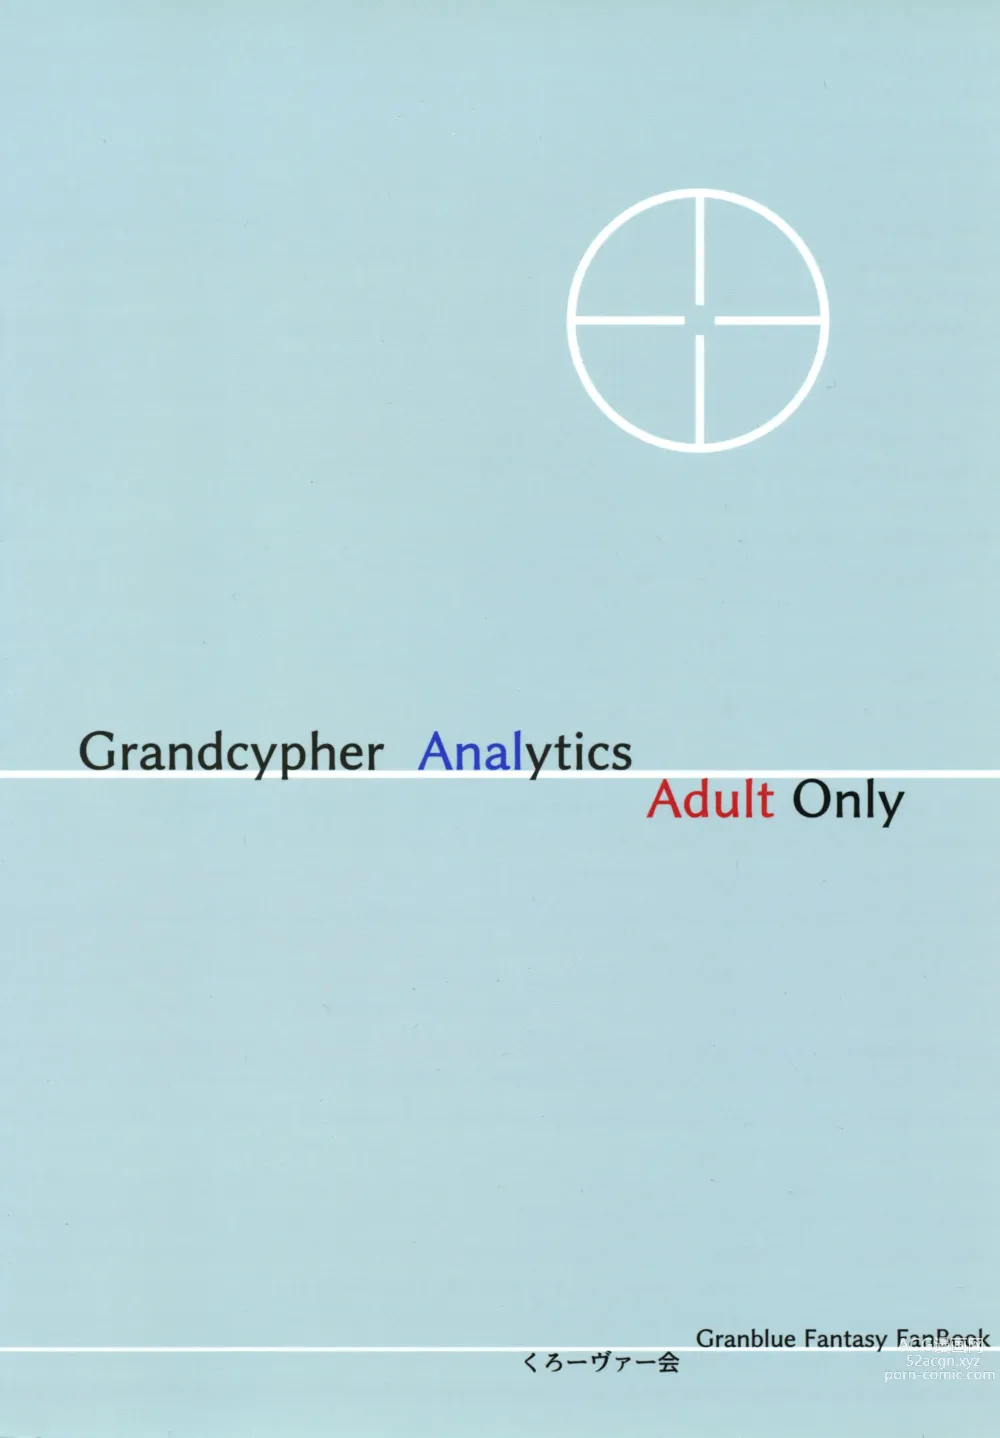 Page 22 of doujinshi Grandcypher Analytics